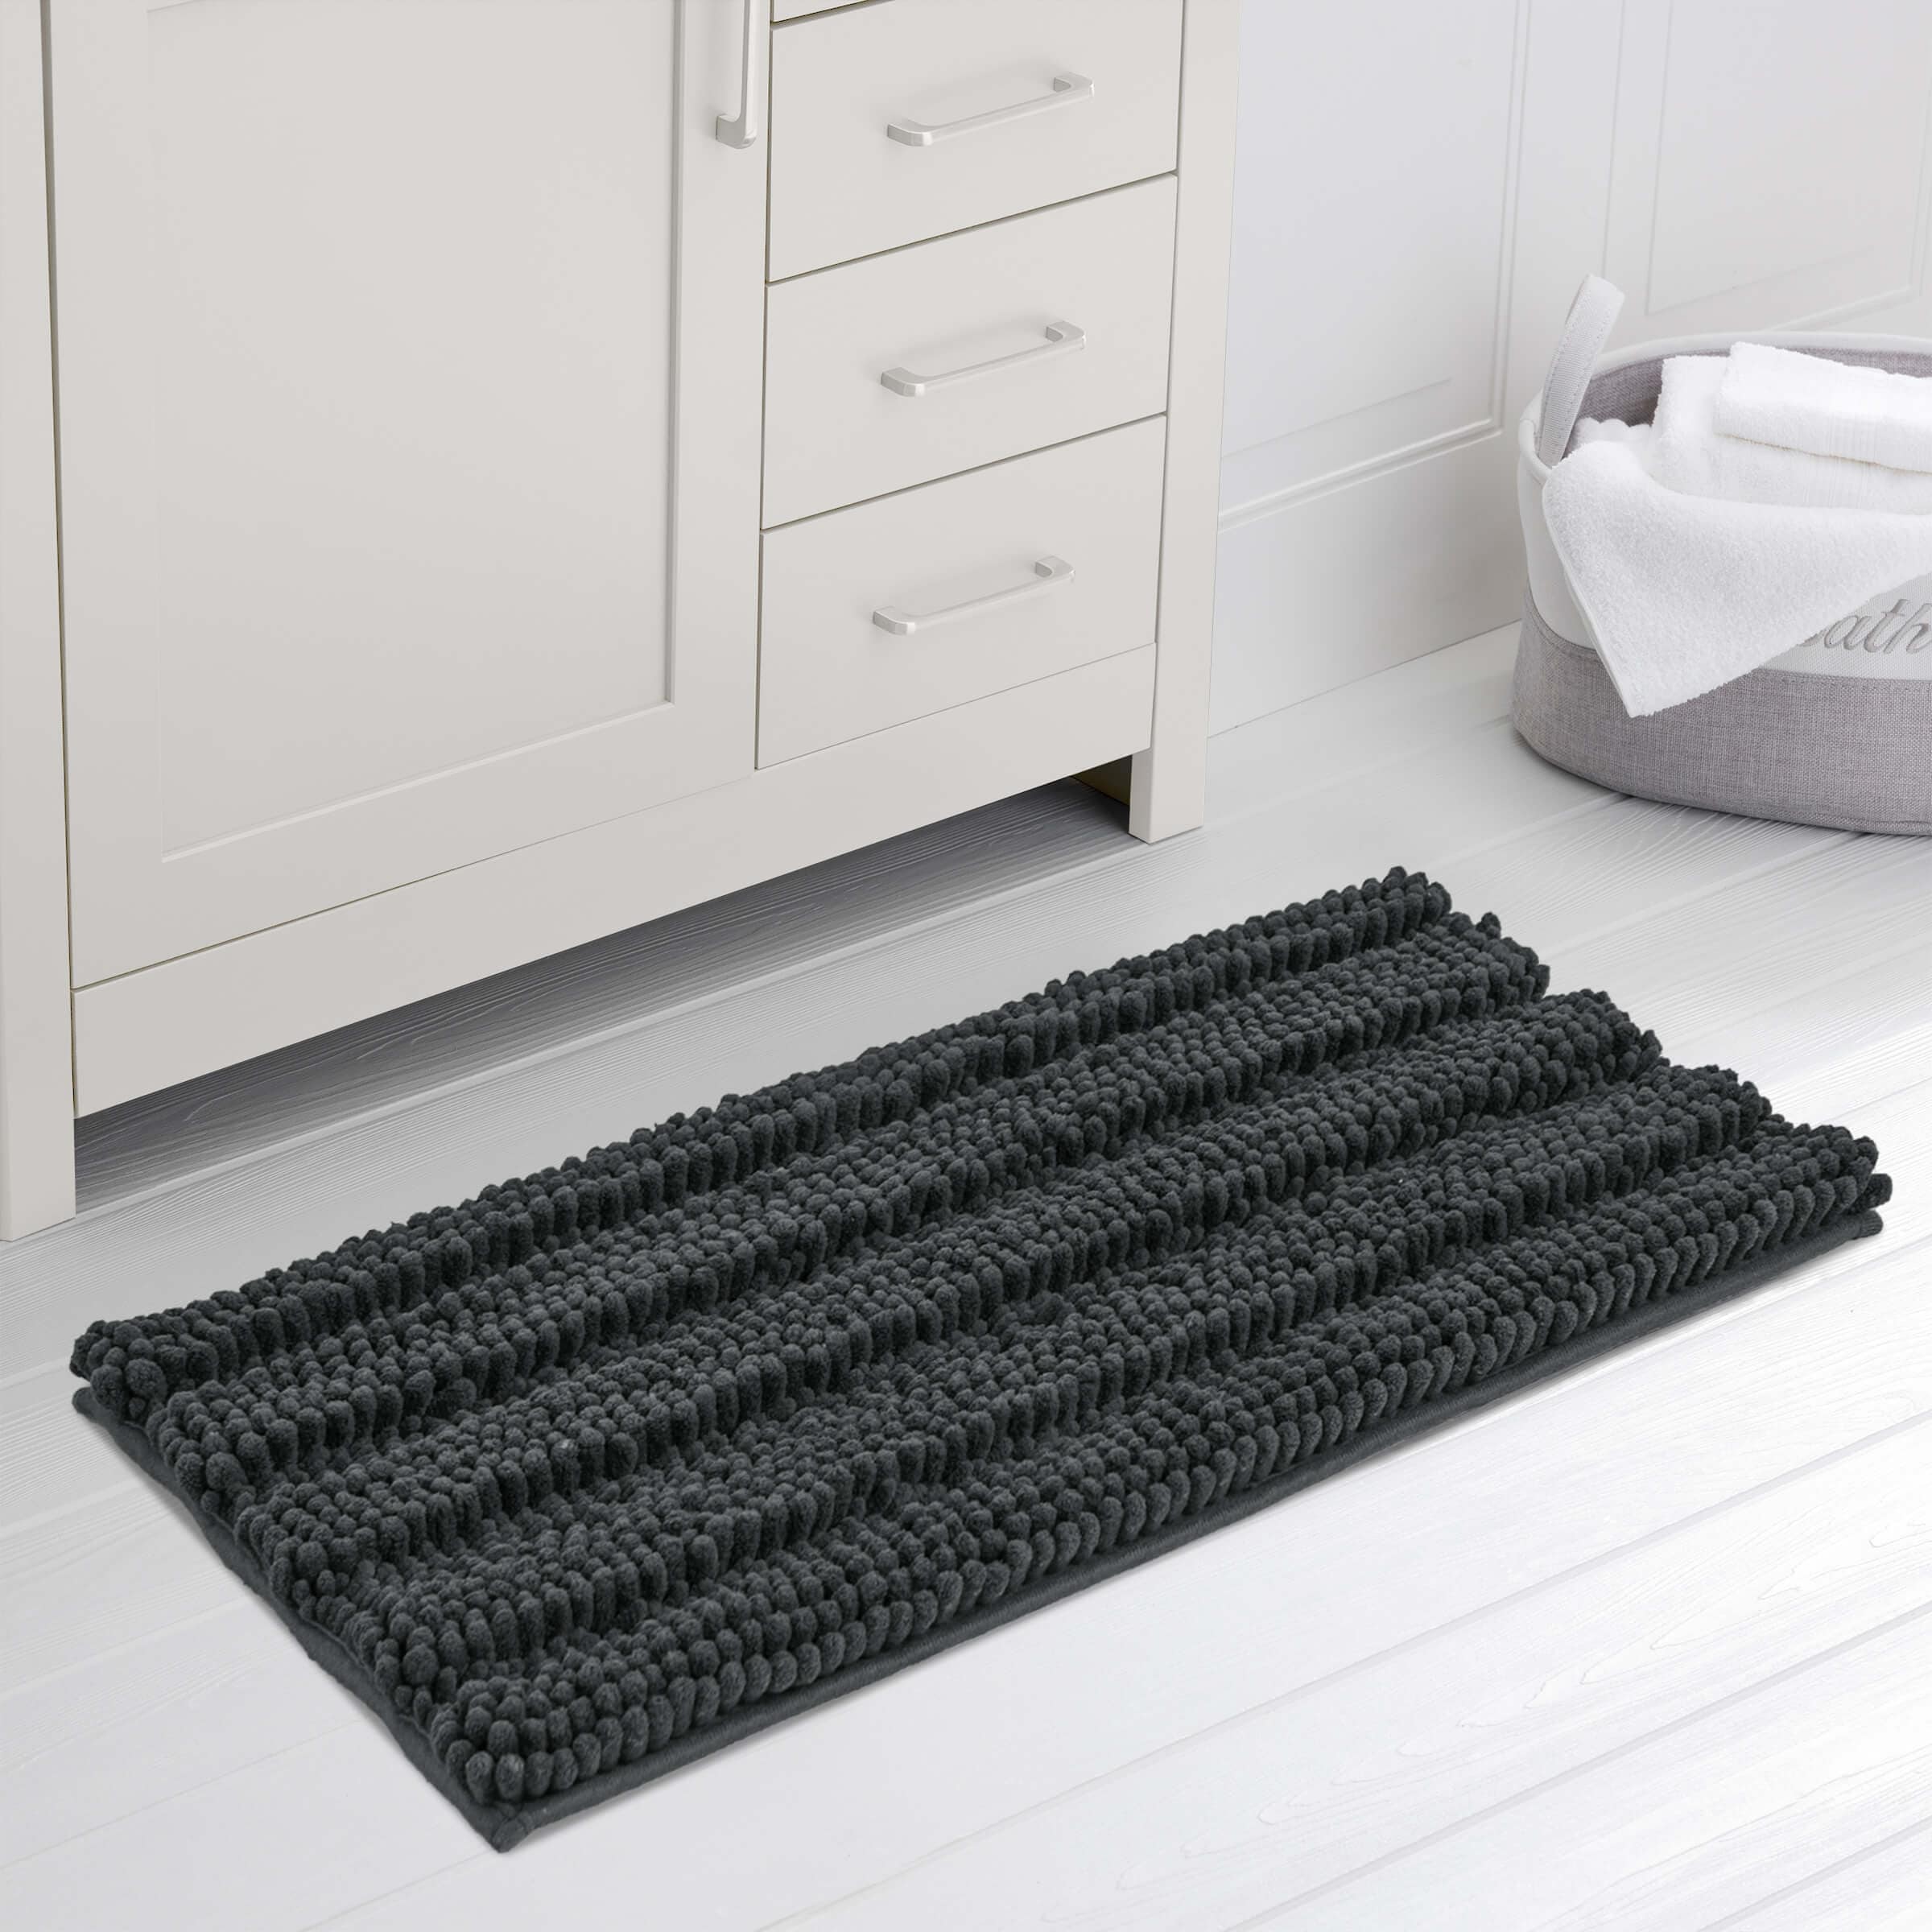 Bathroom Rug Mat Non Slip Black Extra Long Bath Mat for Bathroom Floor -  Fluffy Soft, Ultra Absorbent and Machine Washable Striped Chenille Noodle  Bath Runners …